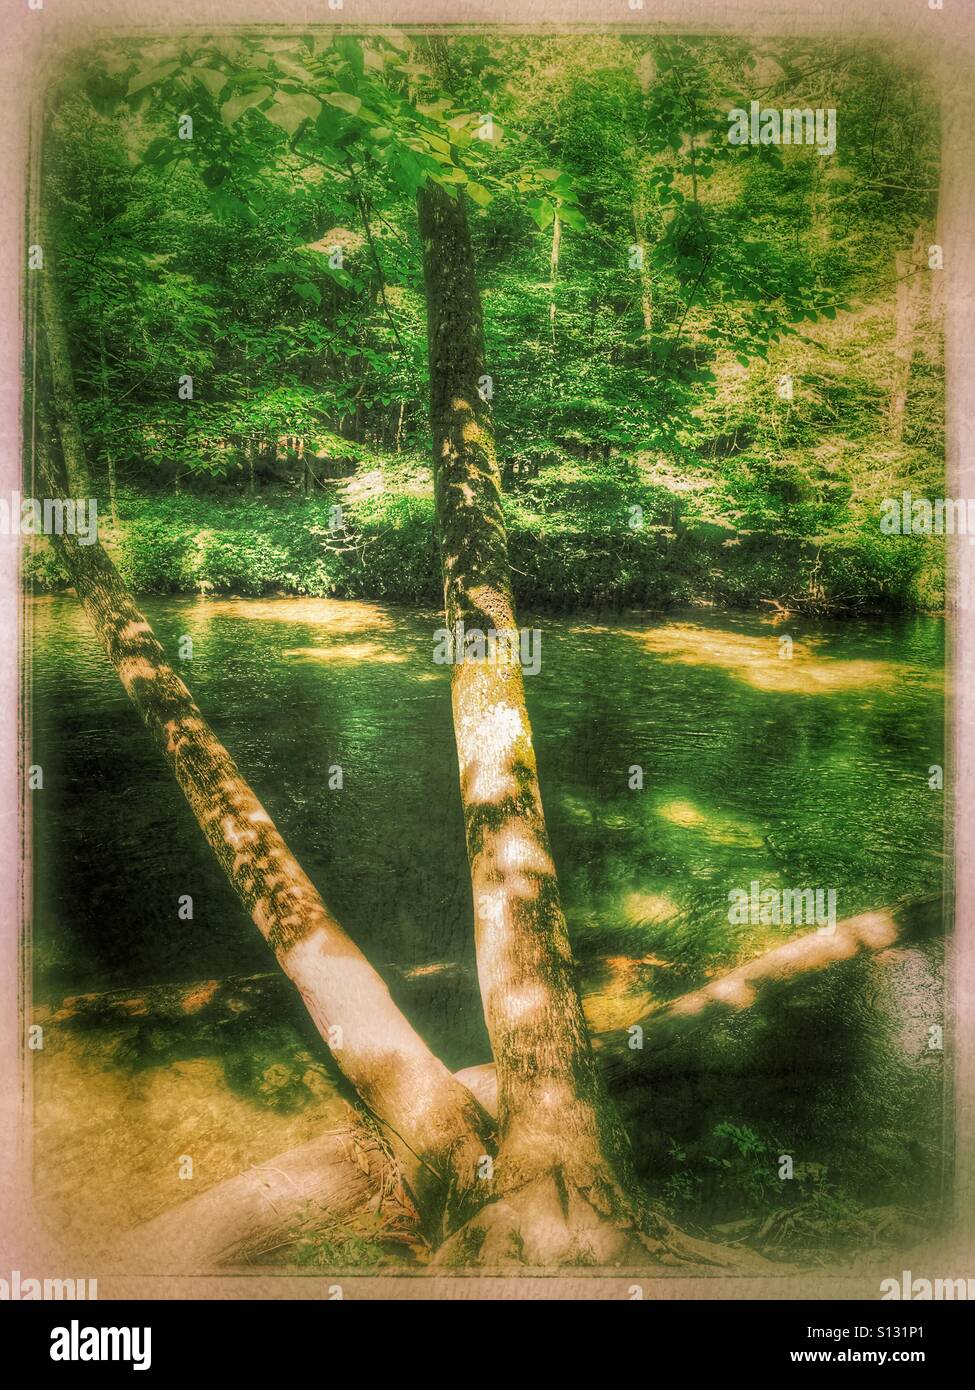 Tree over the water using grunge film Stock Photo